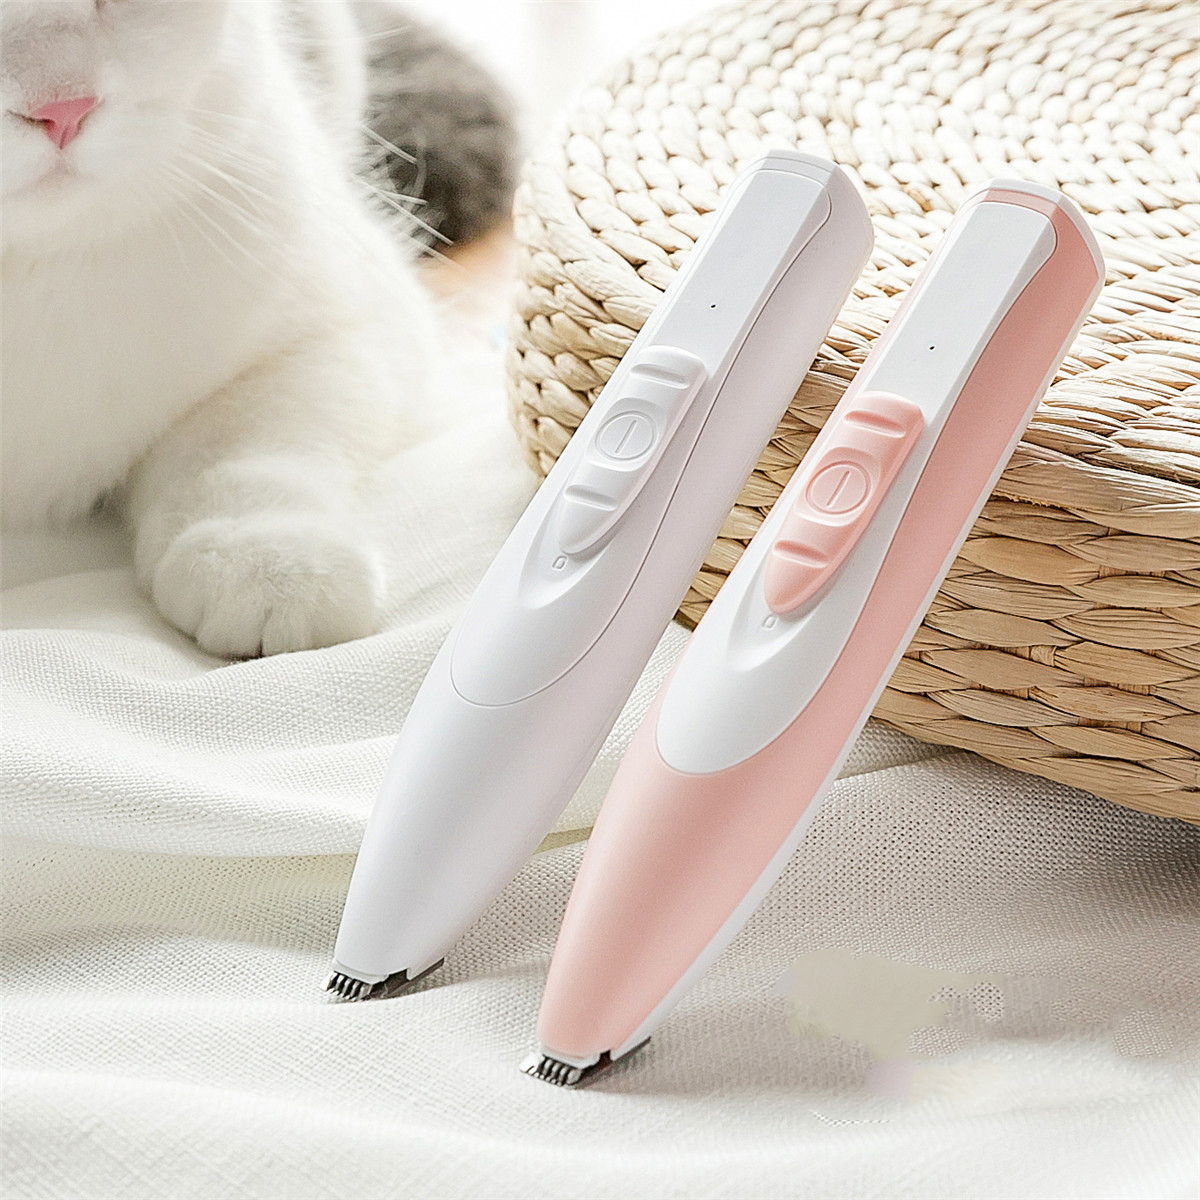 USB-Rechargeable-Electric-Pet-Nail-Hair-Trimmer-Grinder-CatDog-Grooming-Tool-Electrical-Shearing-Cut-1696667-11